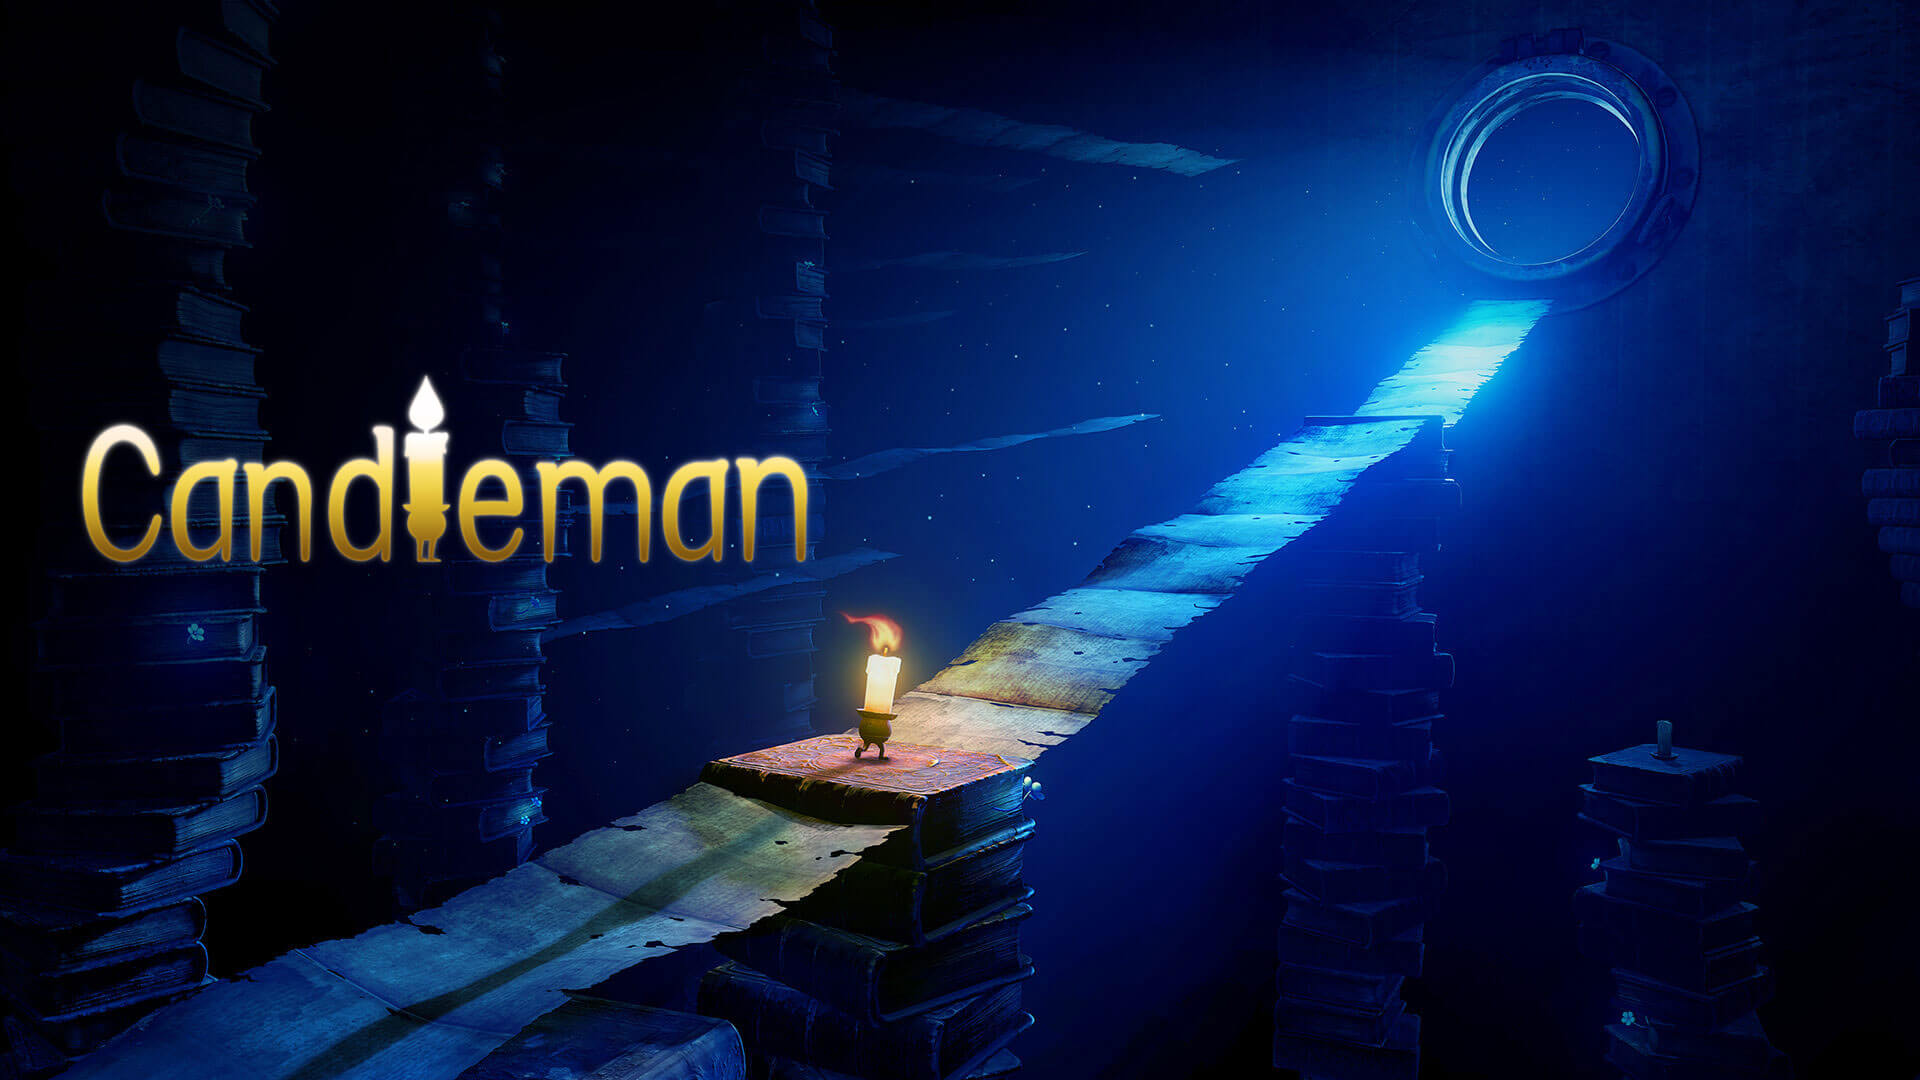 Candleman promotional banner